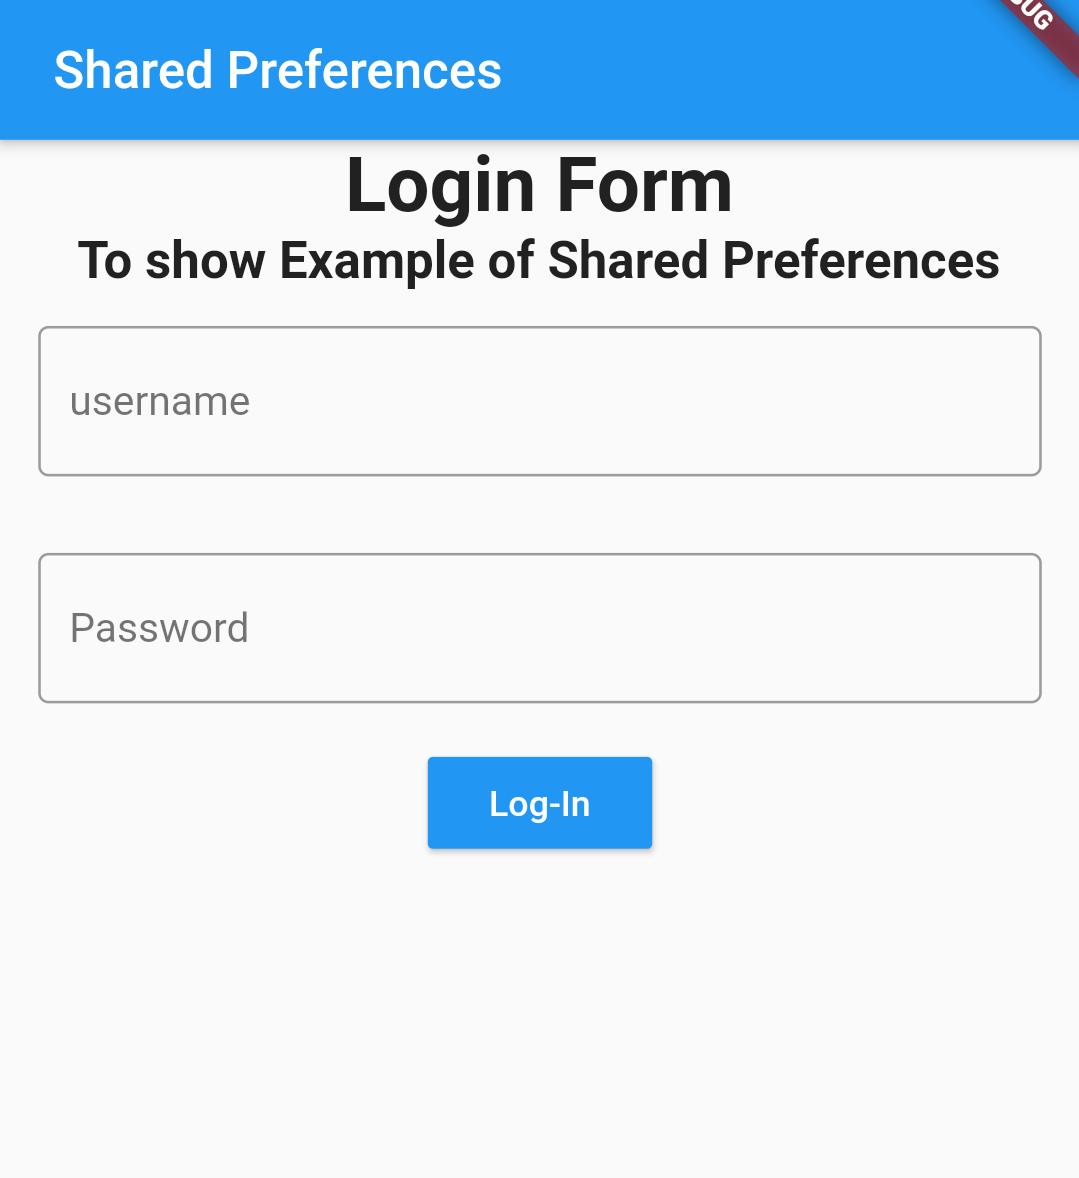 Login screen for shared preferences example